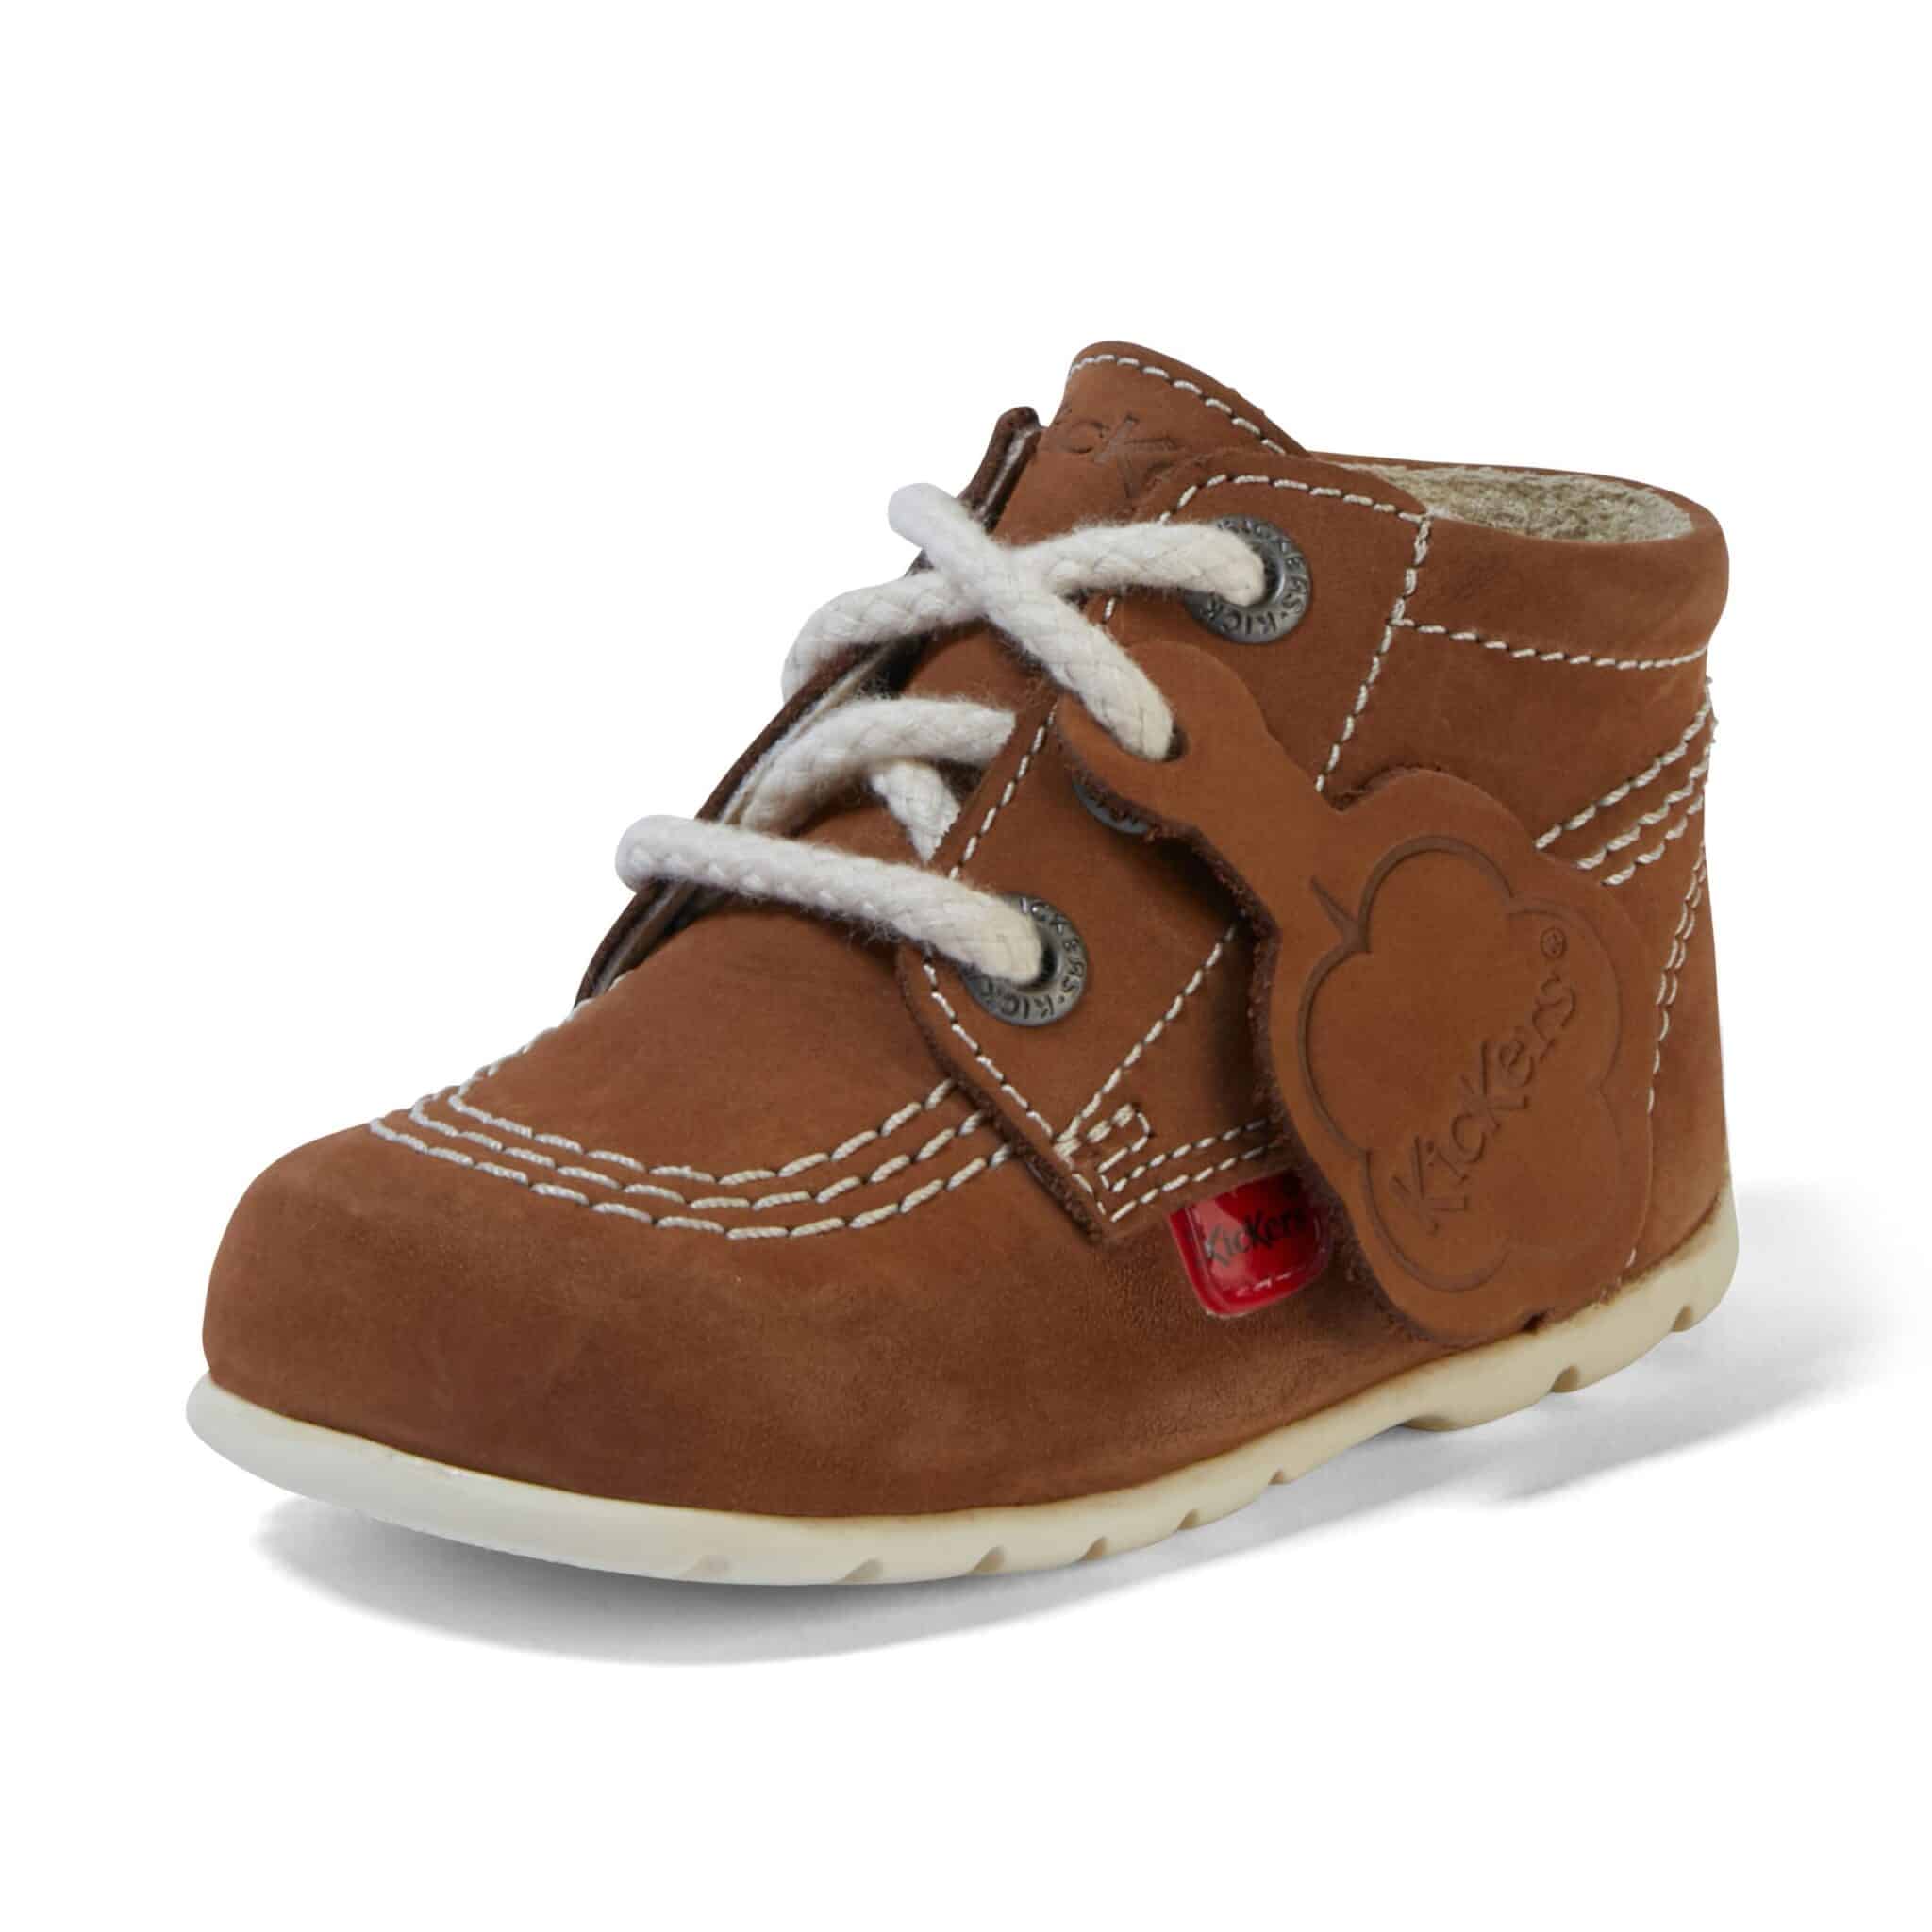 kickers boys brown shoe boots side view